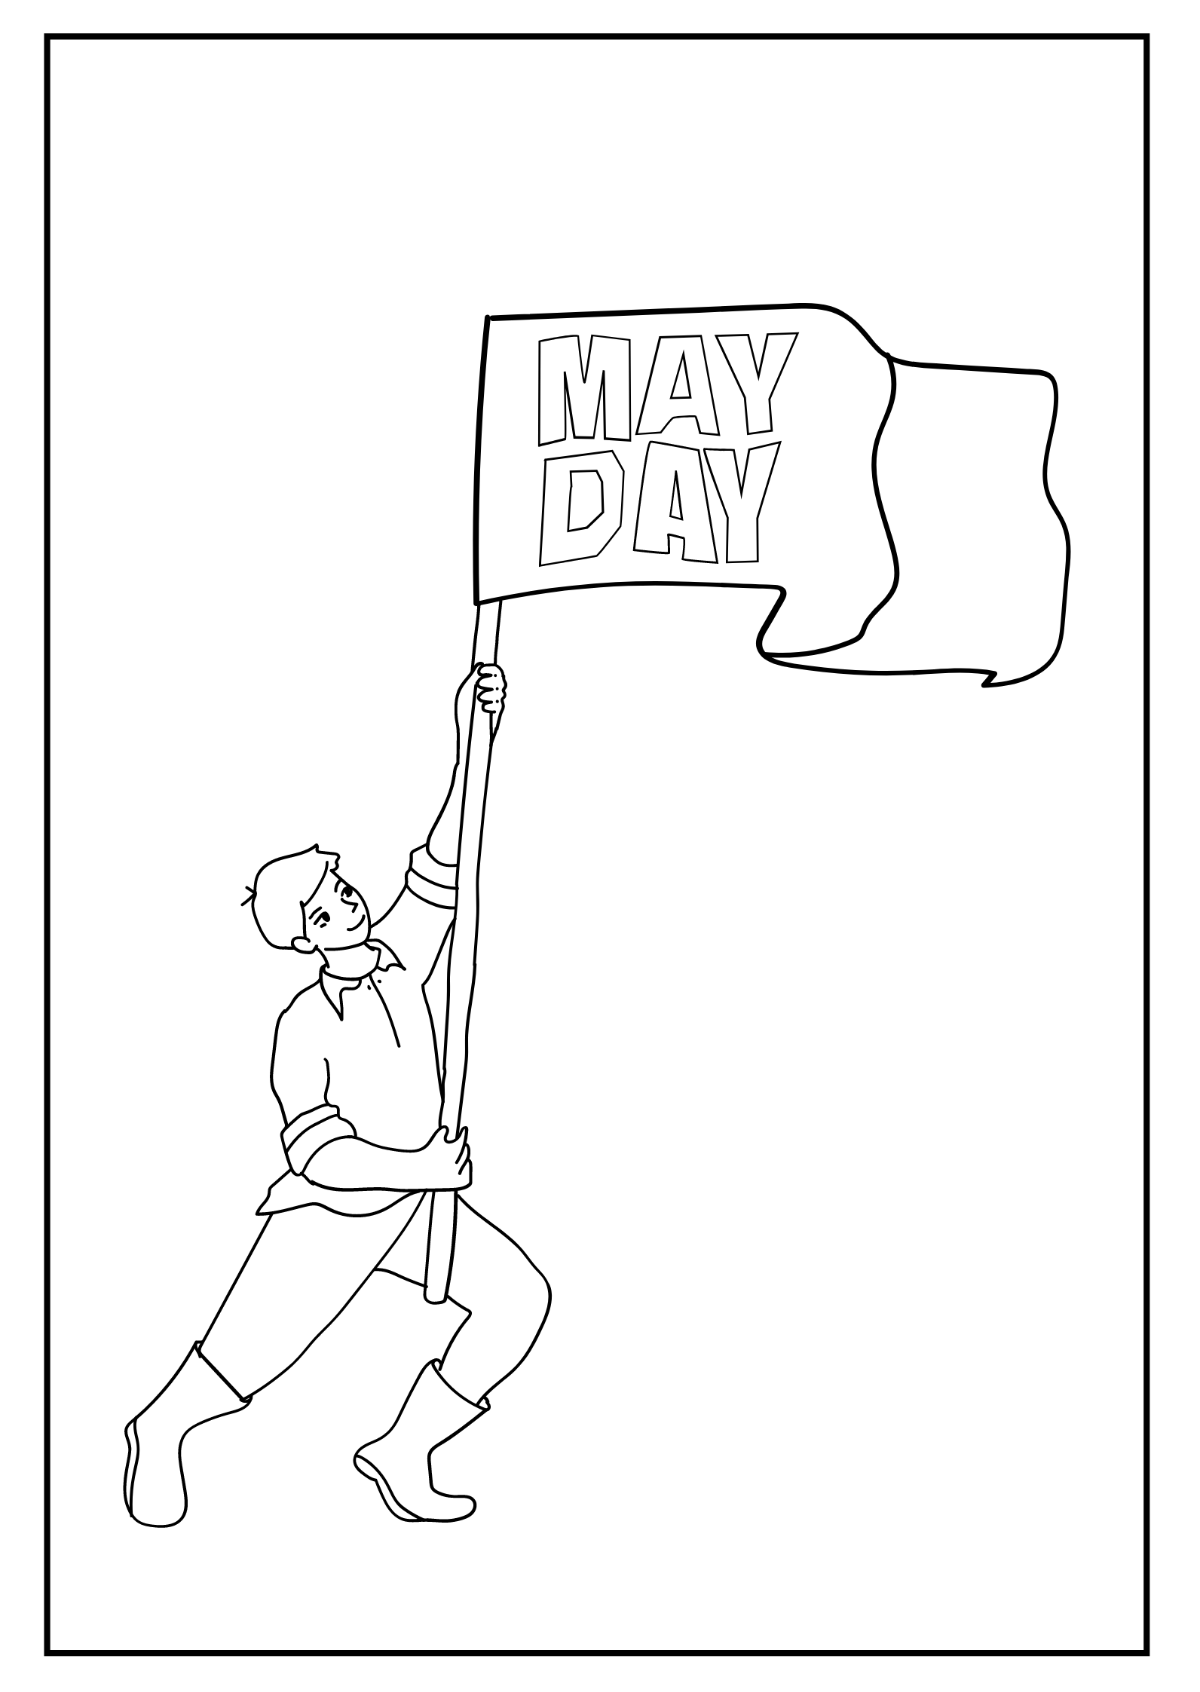 May Day Image Drawing Template